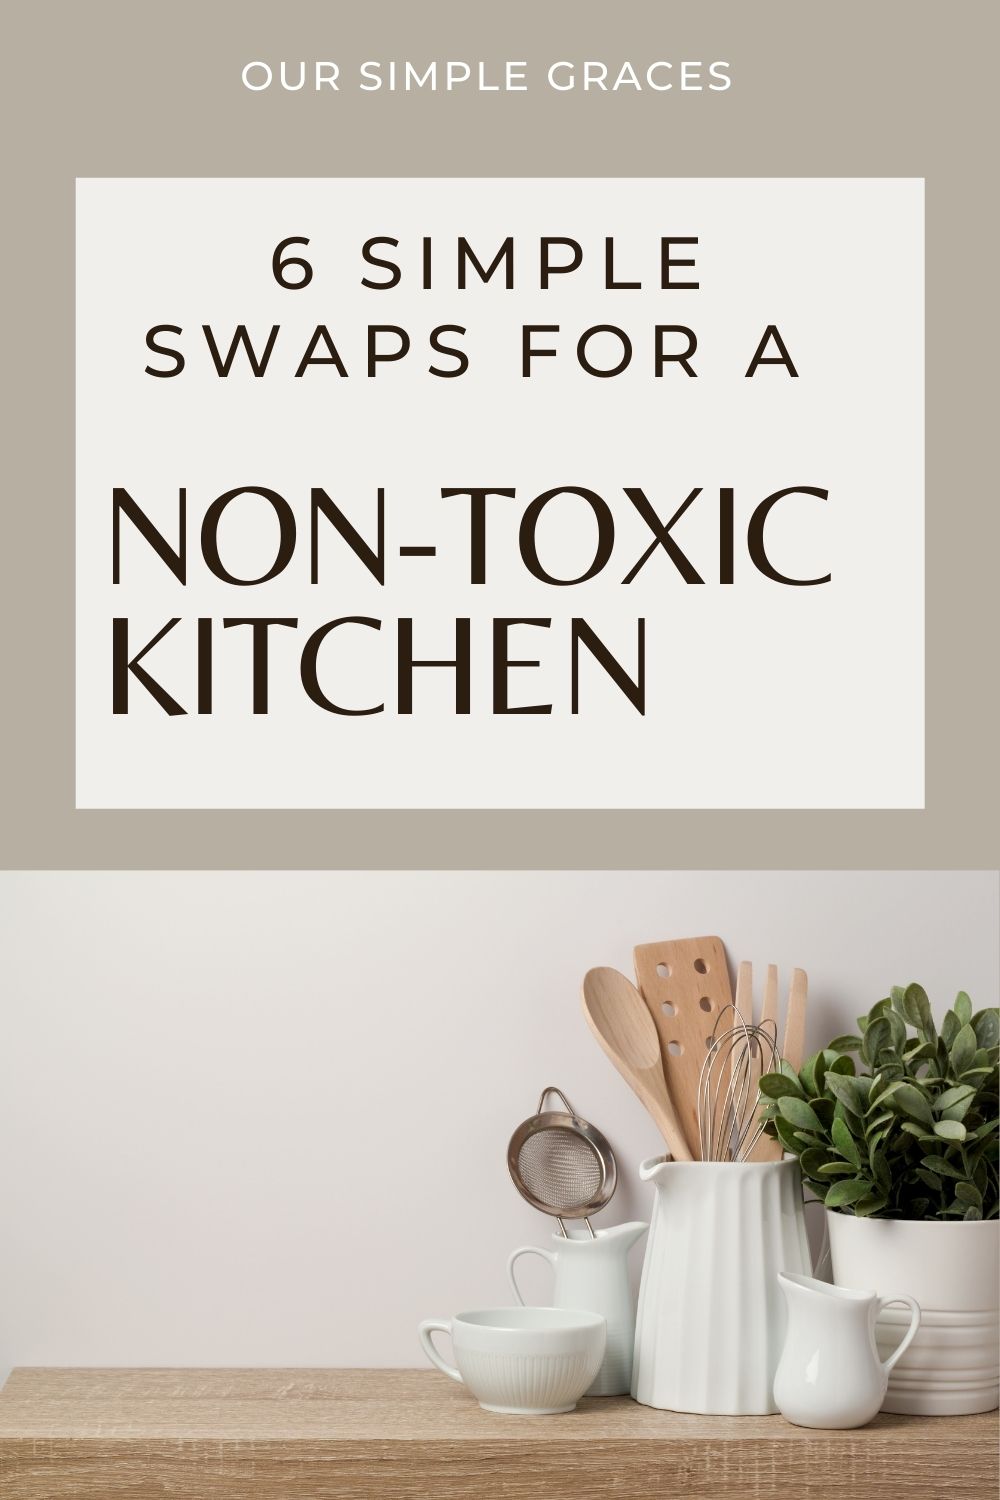 https://oursimplegraces.com/wp-content/uploads/2022/01/non-toxic-kitchen-pin.jpg